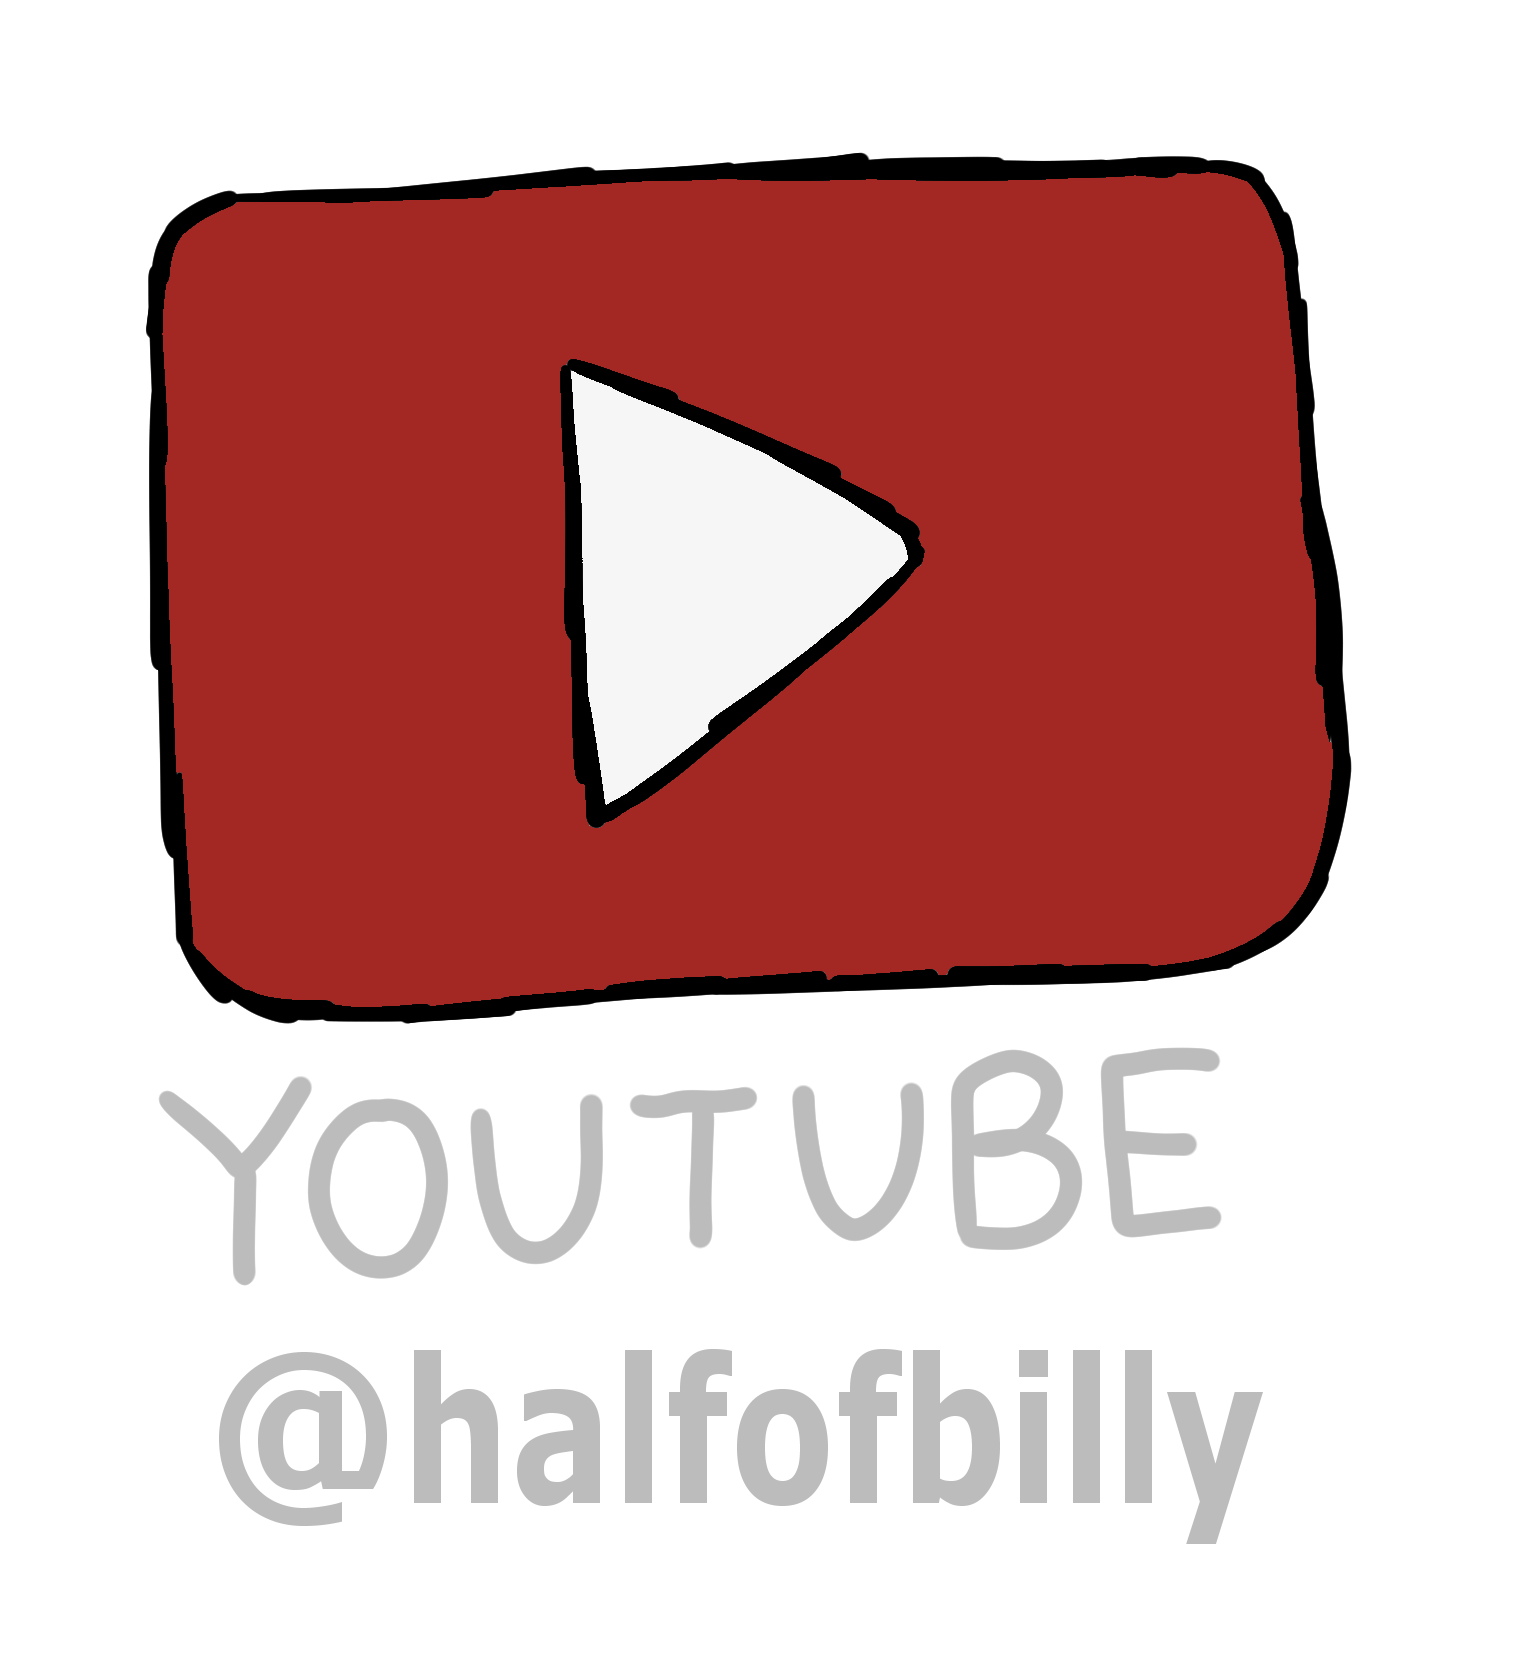 YouTube link: @halfofbilly